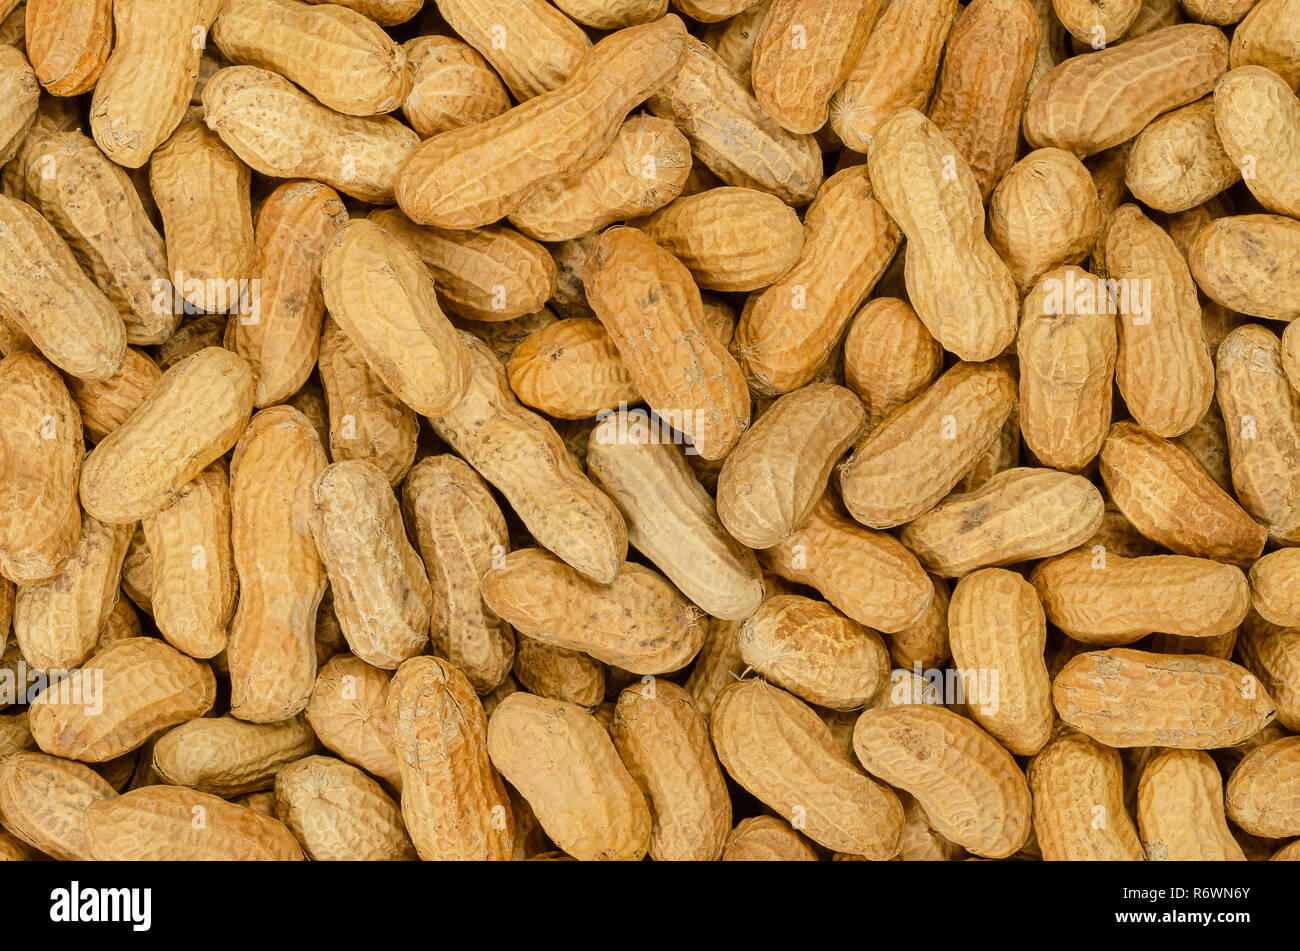 Peanuts with shell, background, close up. Also groundnut or goober. Pile of unshelled dry roasted whole pods of Arachis hypogaea, used as snack. Stock Photo